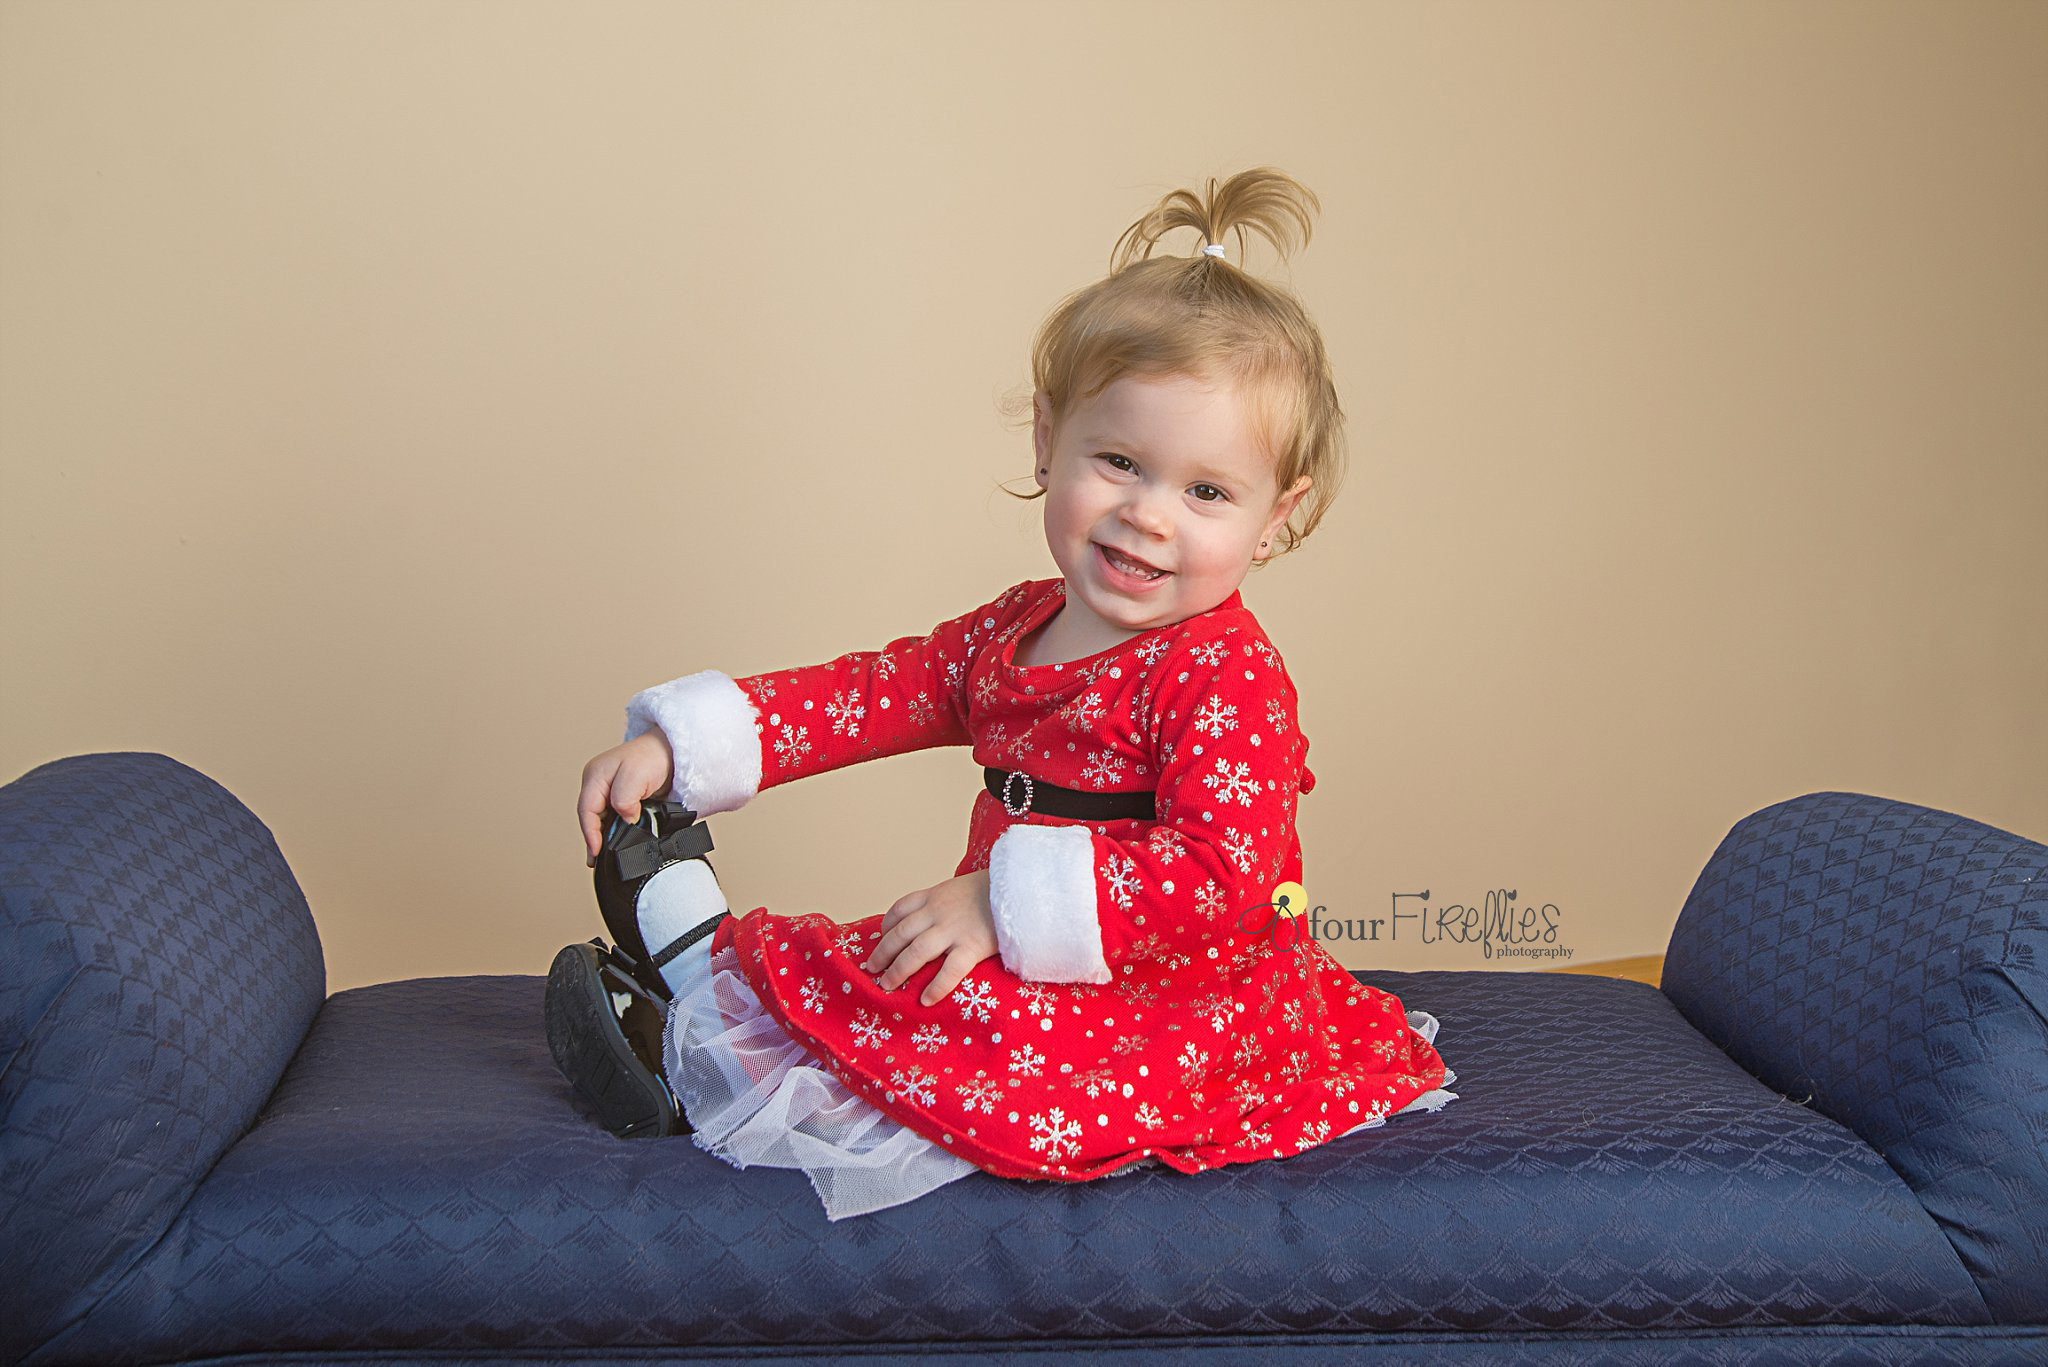 st-louis-photography-studio-girl-in-christmas-dress-holding-feet-on-blue-couch.jpg